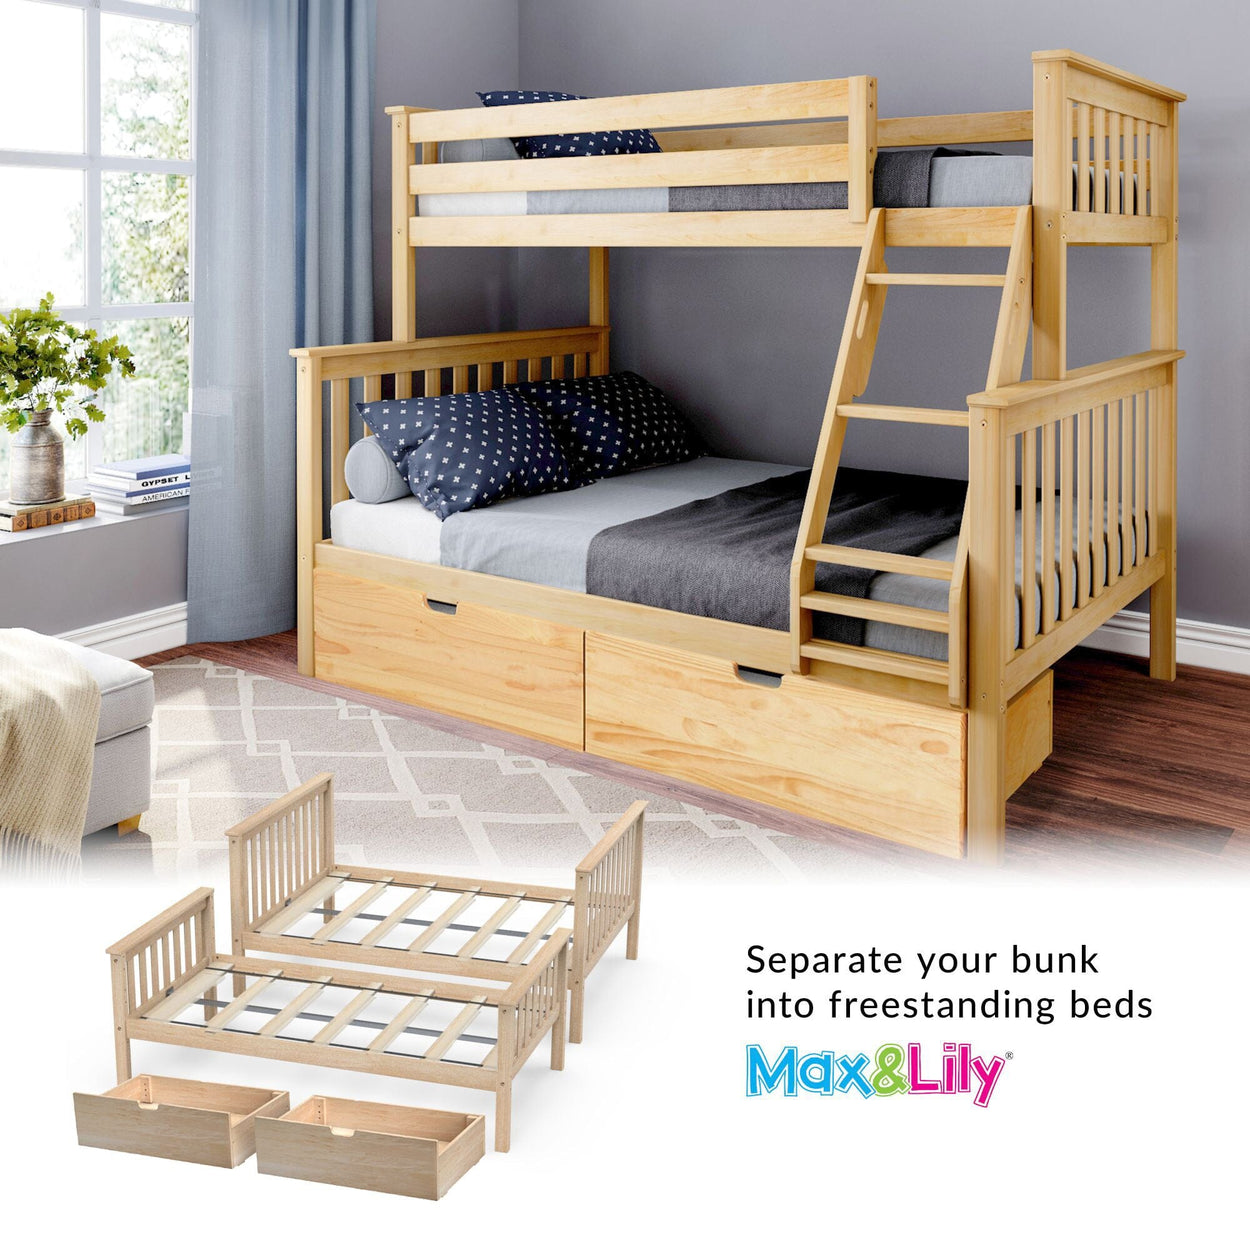 187231-001 : Bunk Beds Twin over Full Bunk Bed + Storage Drawers, Natural